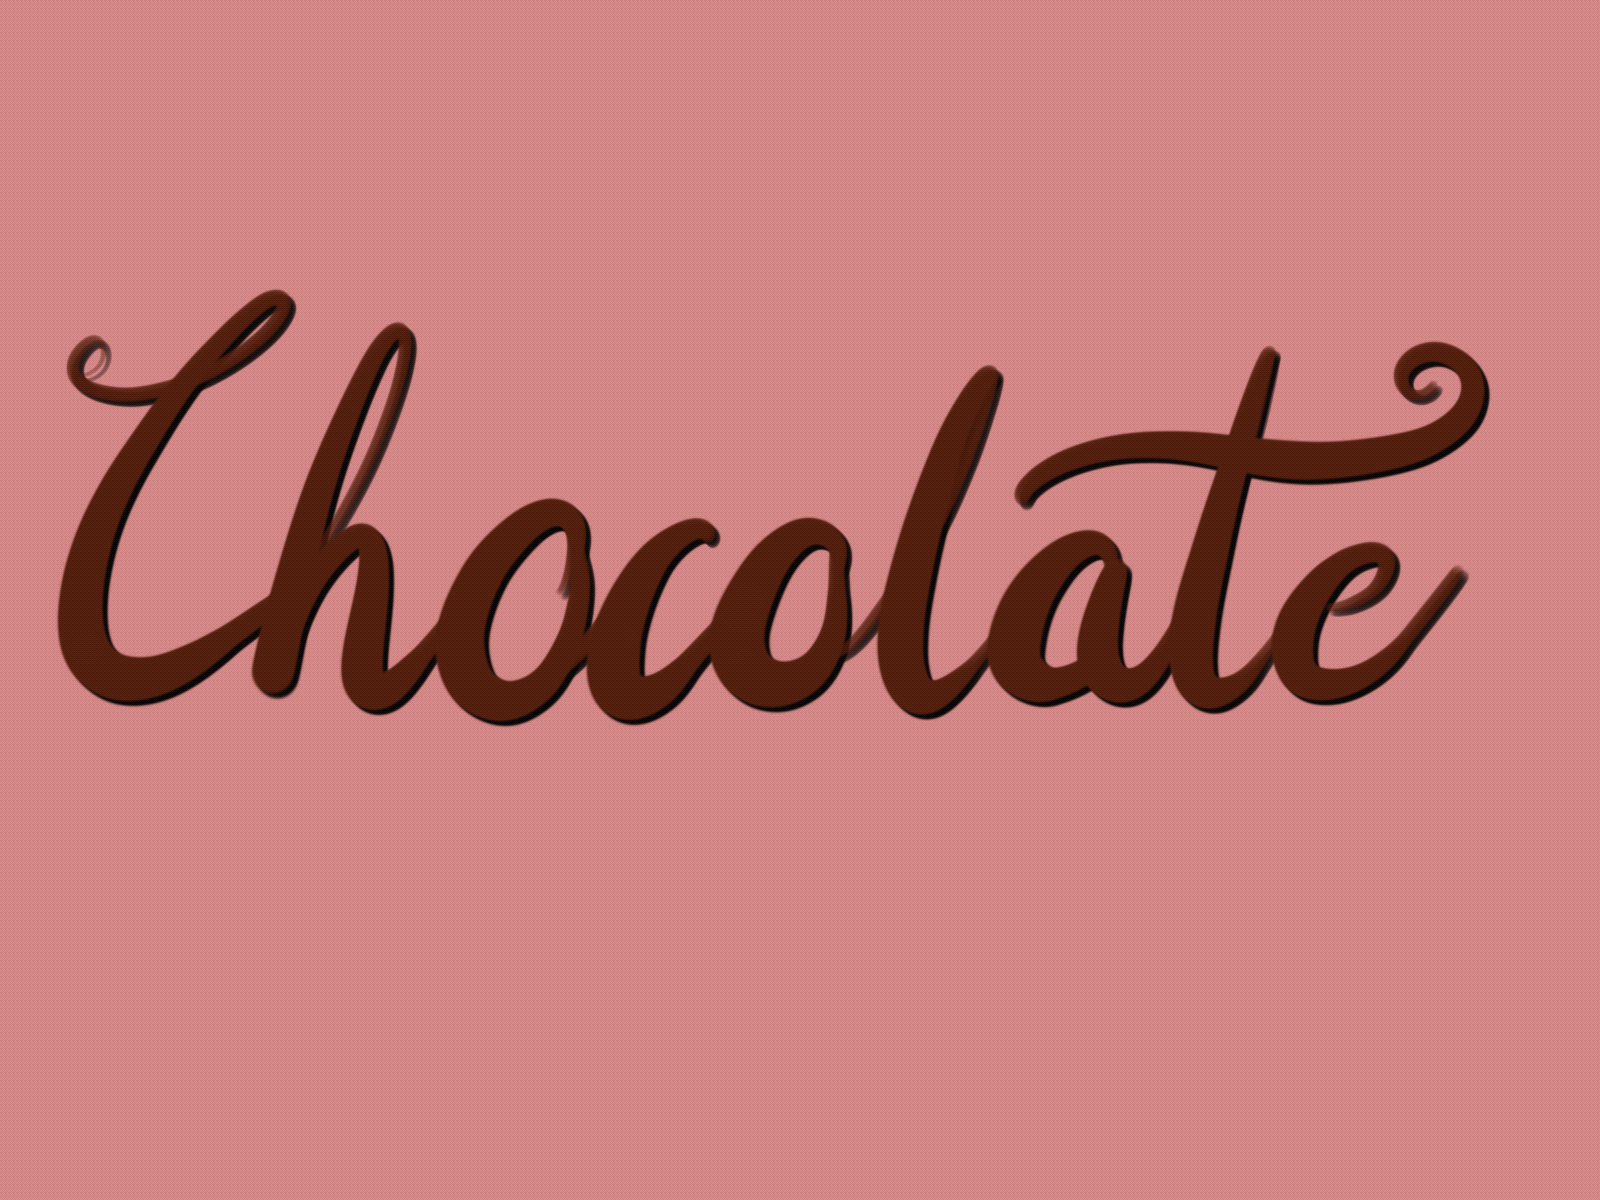 Chocolate 🍫😋 animation calligraphy design lettering